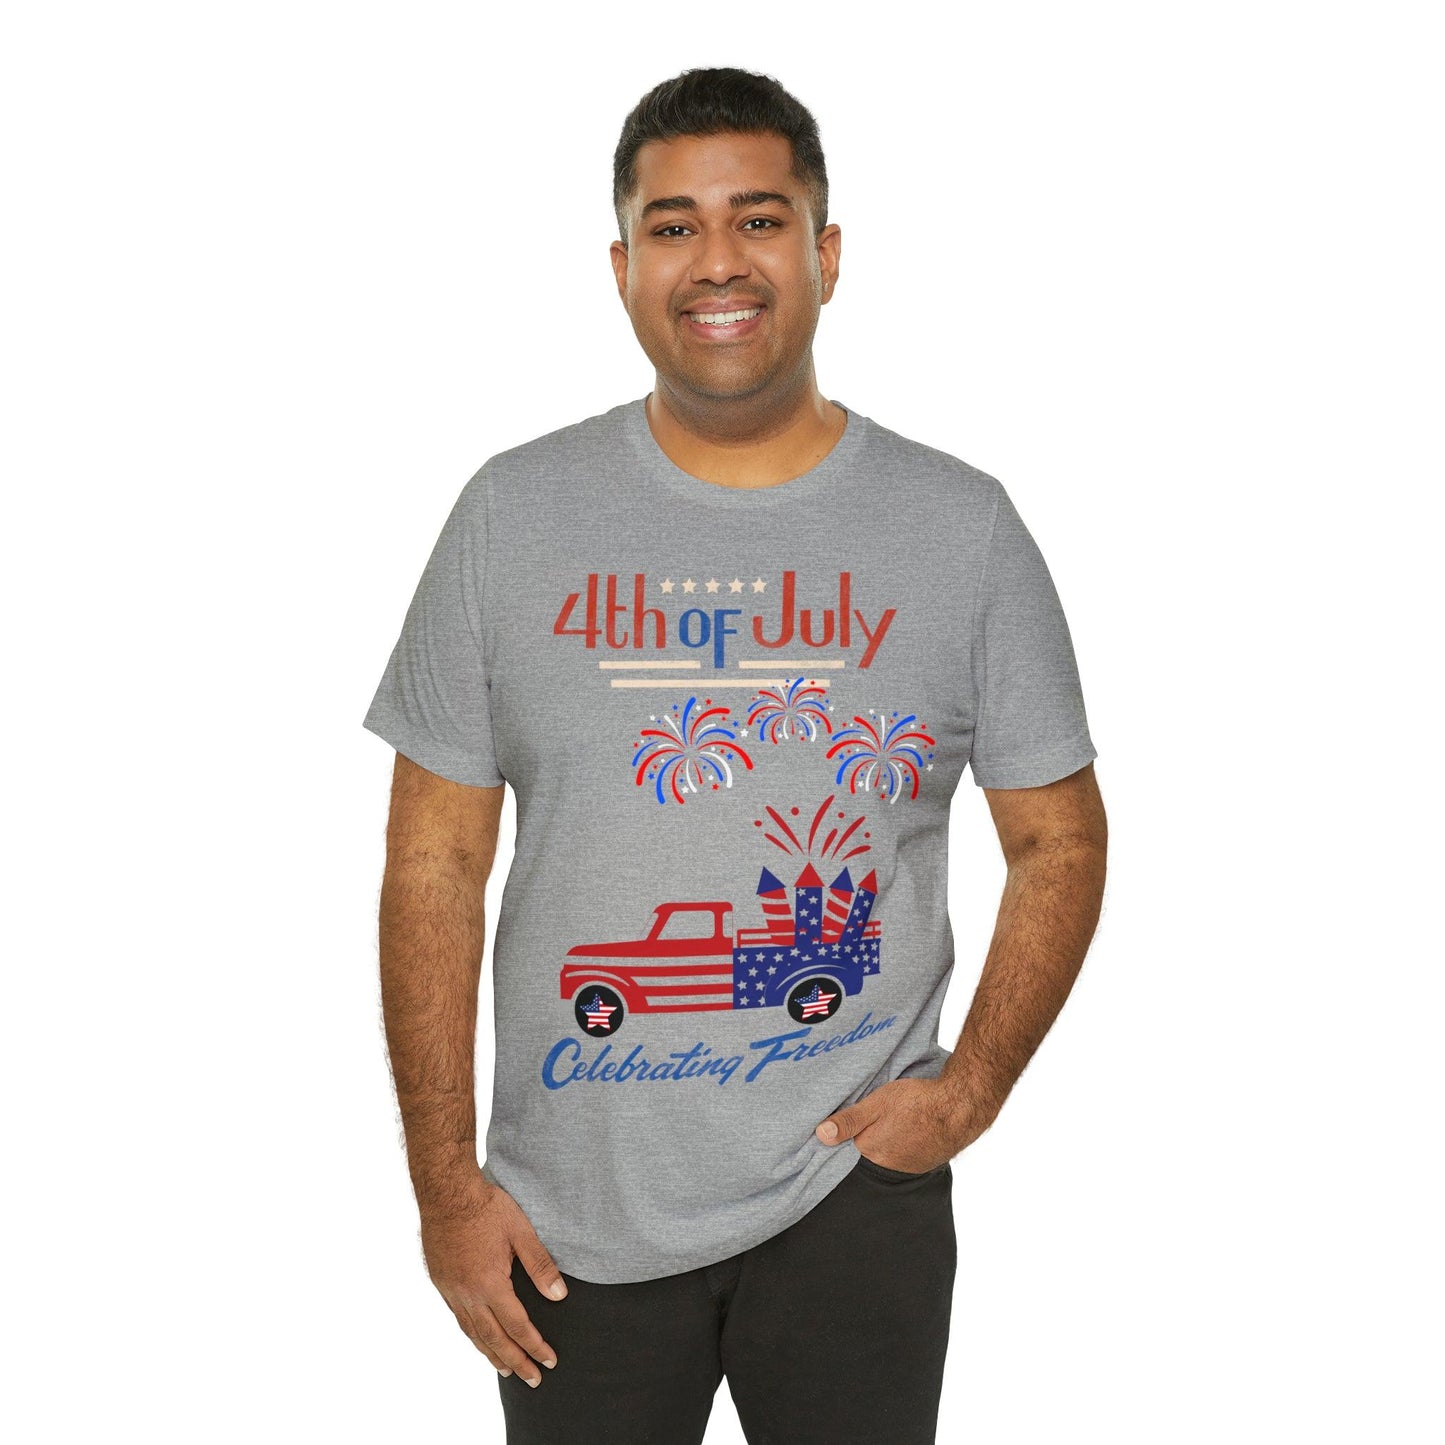 Celebrate Independence Day with Patriotic Shirts: 4th of July Shirts for Women and Men, Fireworks, Freedom, and Patriotic Designs